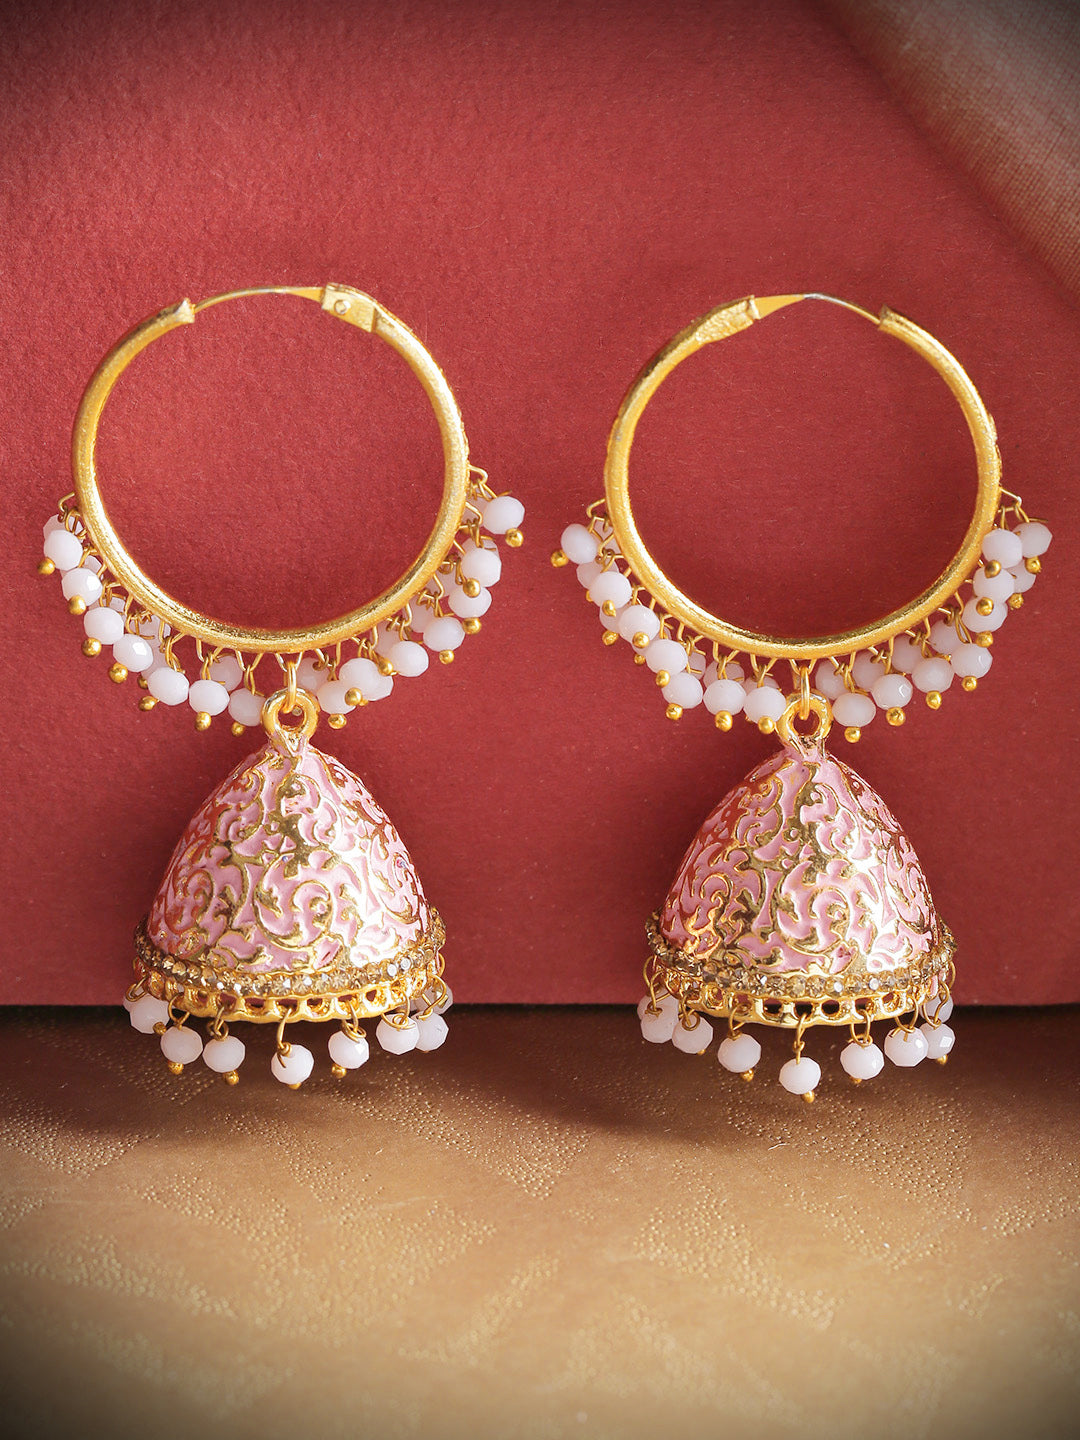 Gold-Plated Beads Drop Jhumka Earrings with Meenakari In Pink Color